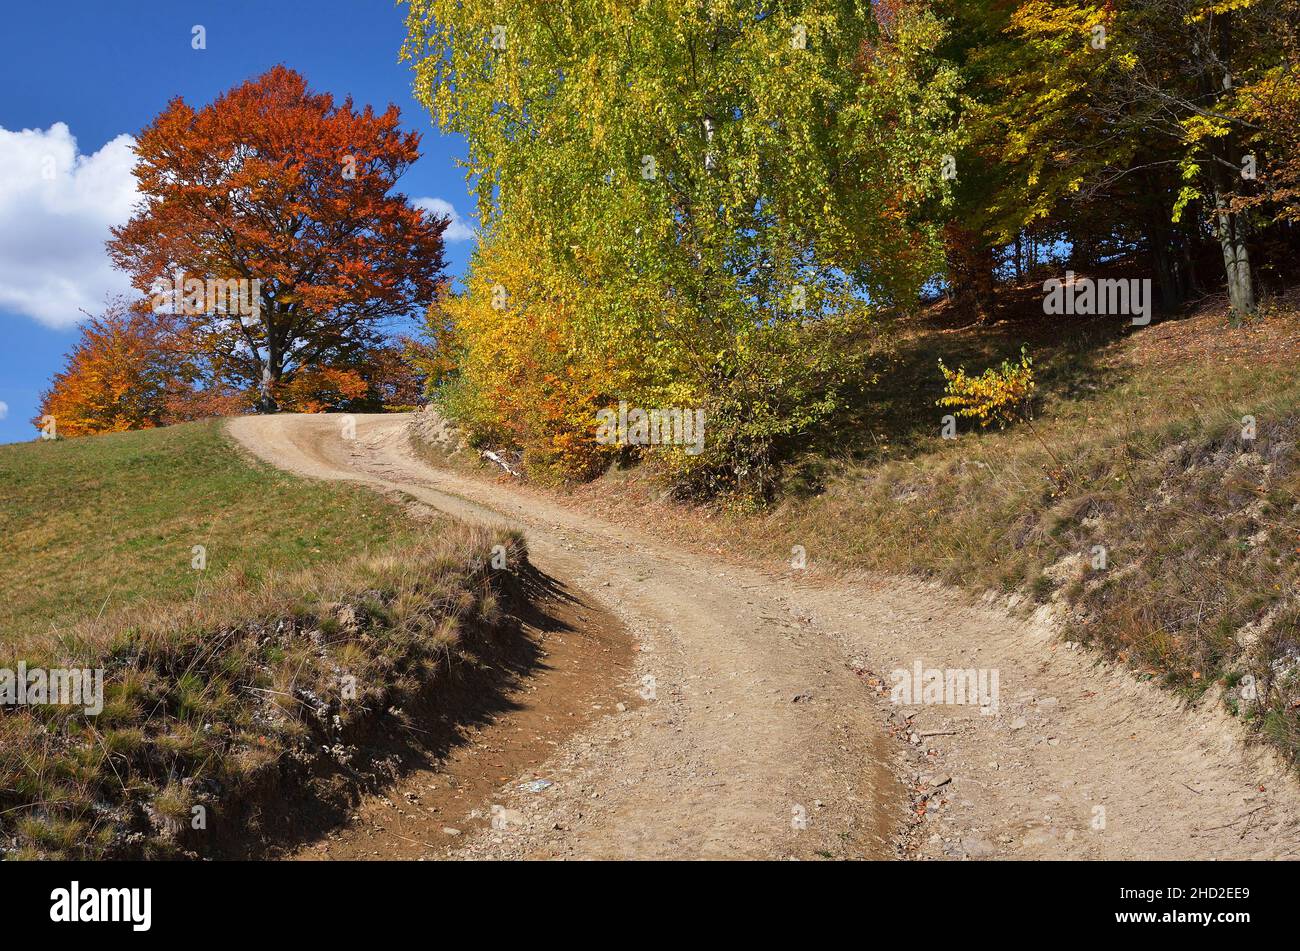 Autumn landscape sunny day with a road in the forest Stock Photo